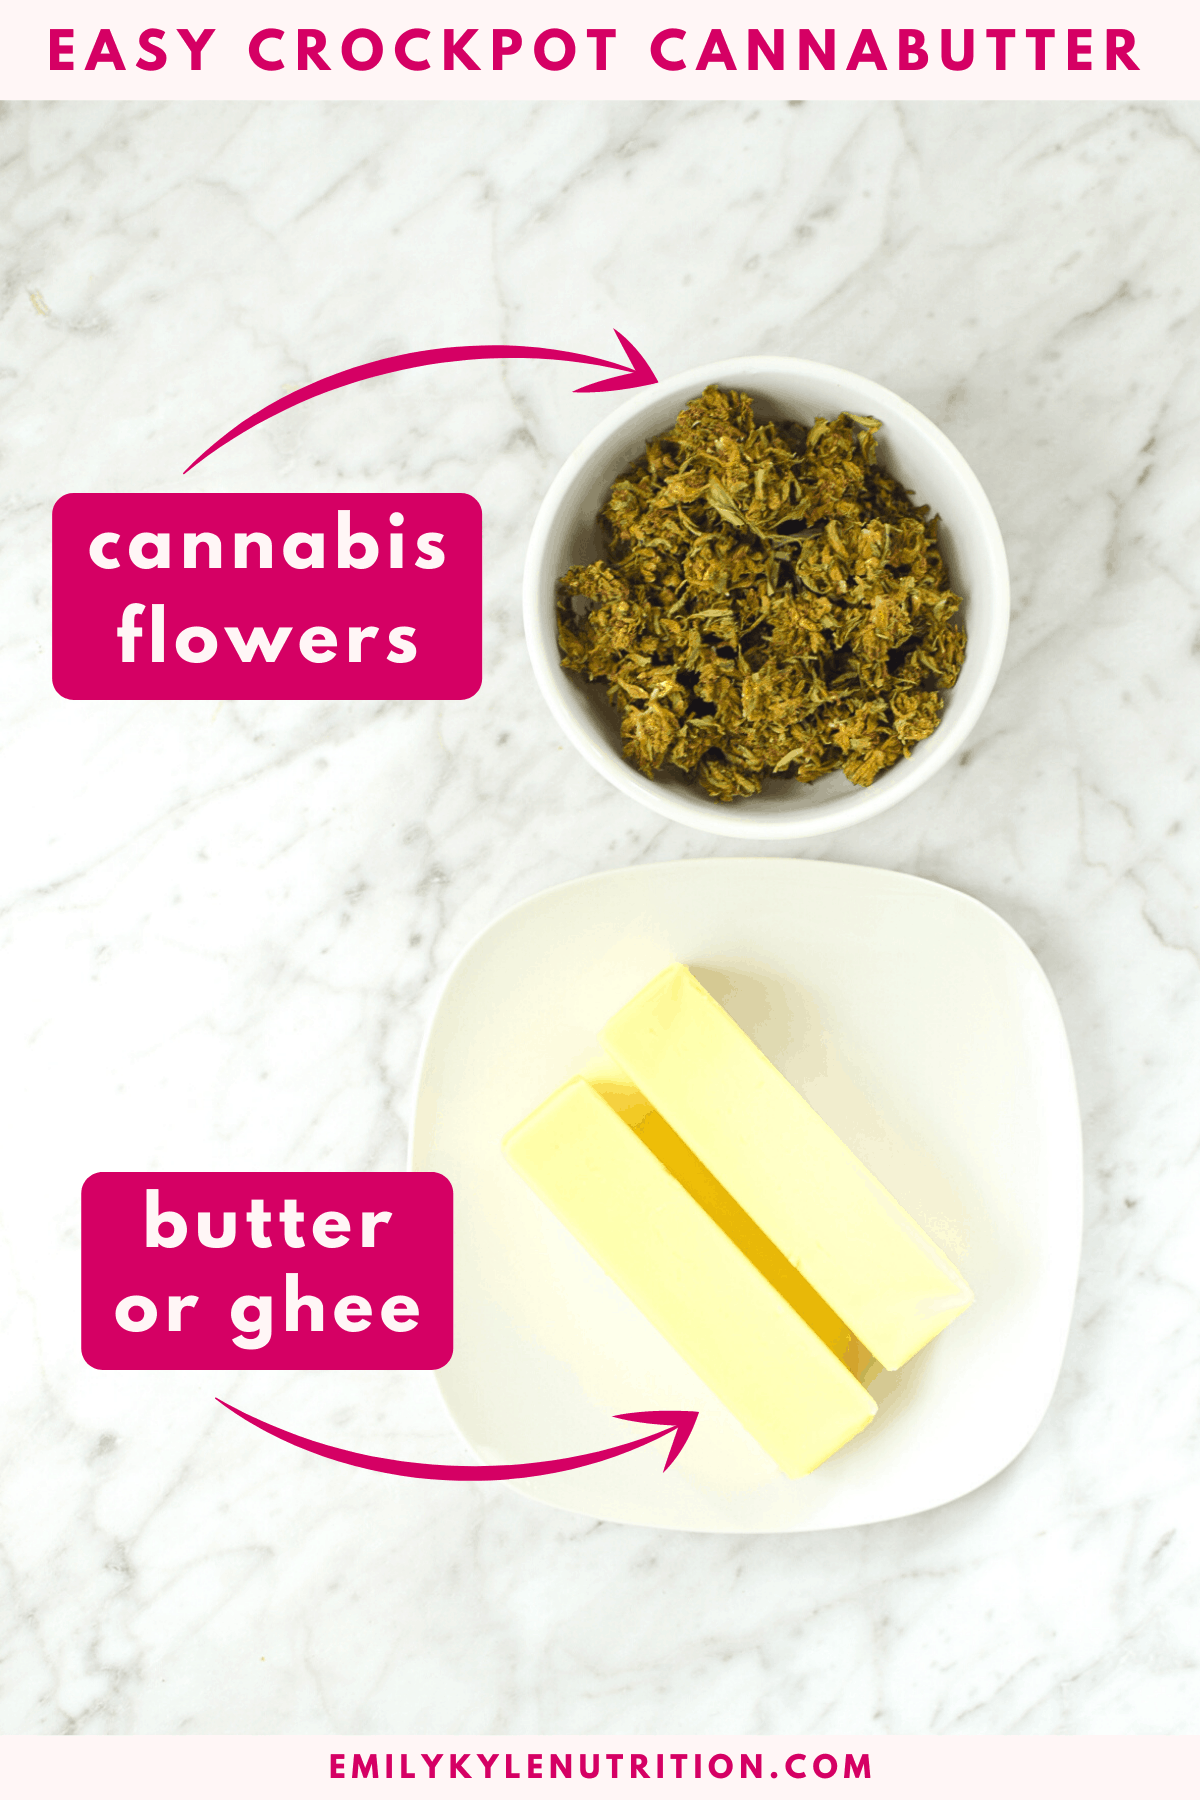 A white counter top with a bowl of cannabis and a plate of butter describing the ingredients used to make cannabutter